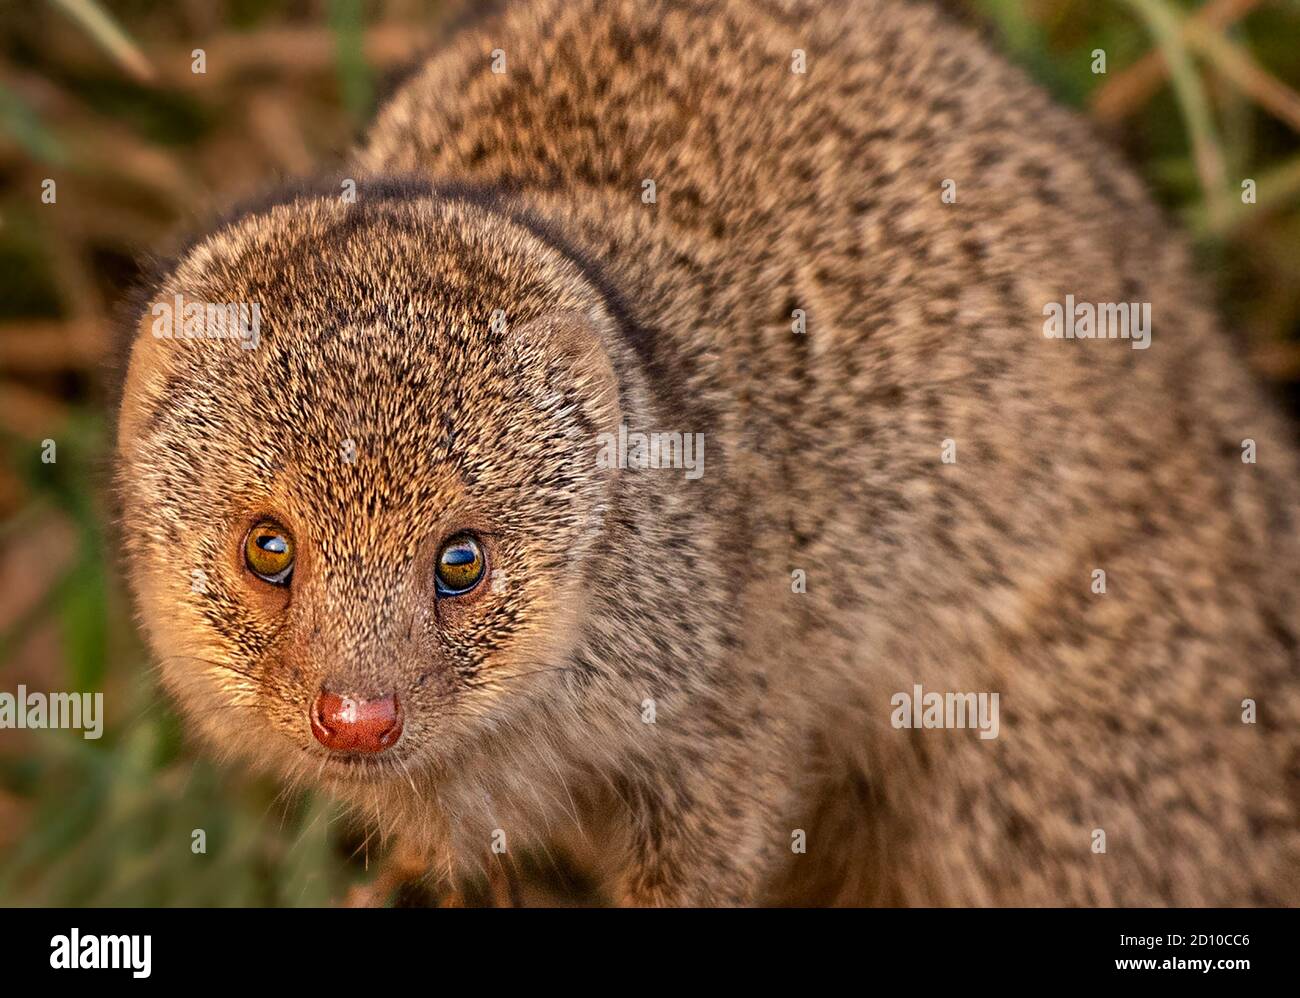 The Indian grey mongoose is a mongoose species native to the Indian subcontinent and West Asia. It is listed as Least Concern on the IUCN Red List. Stock Photo